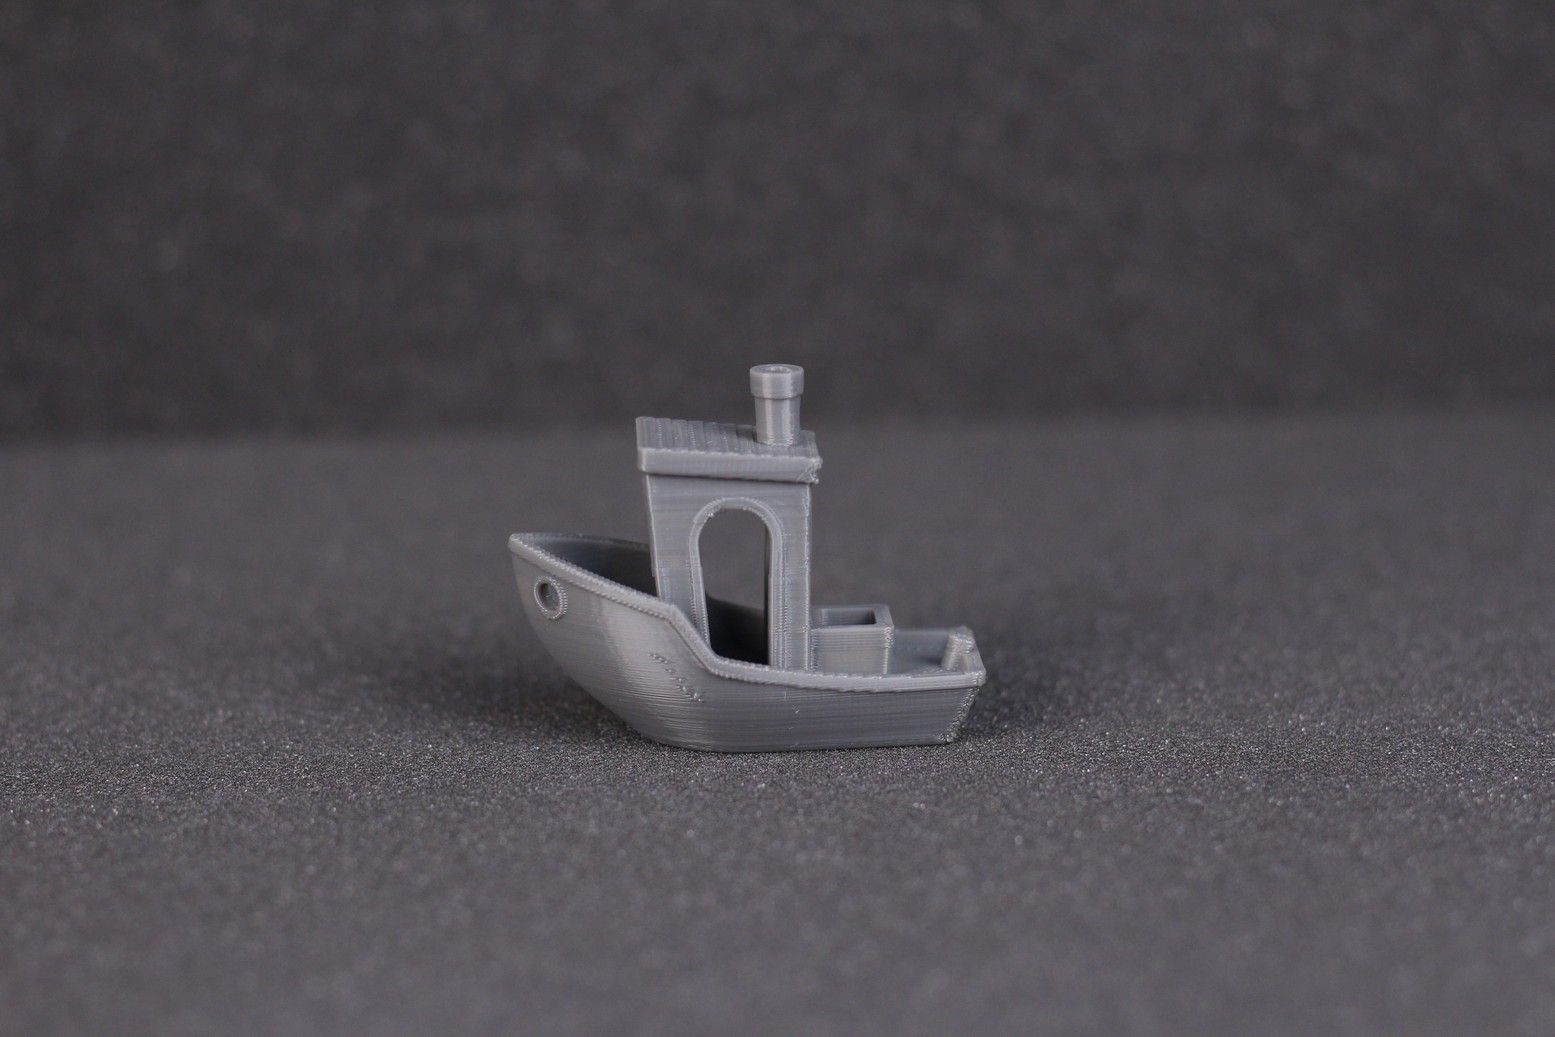 Second benchy on the LOTMAXX SC 10 Shark V2 3 | LOTMAXX SC-10 Shark V2 Review: Dual Color Printing and Laser Engraving